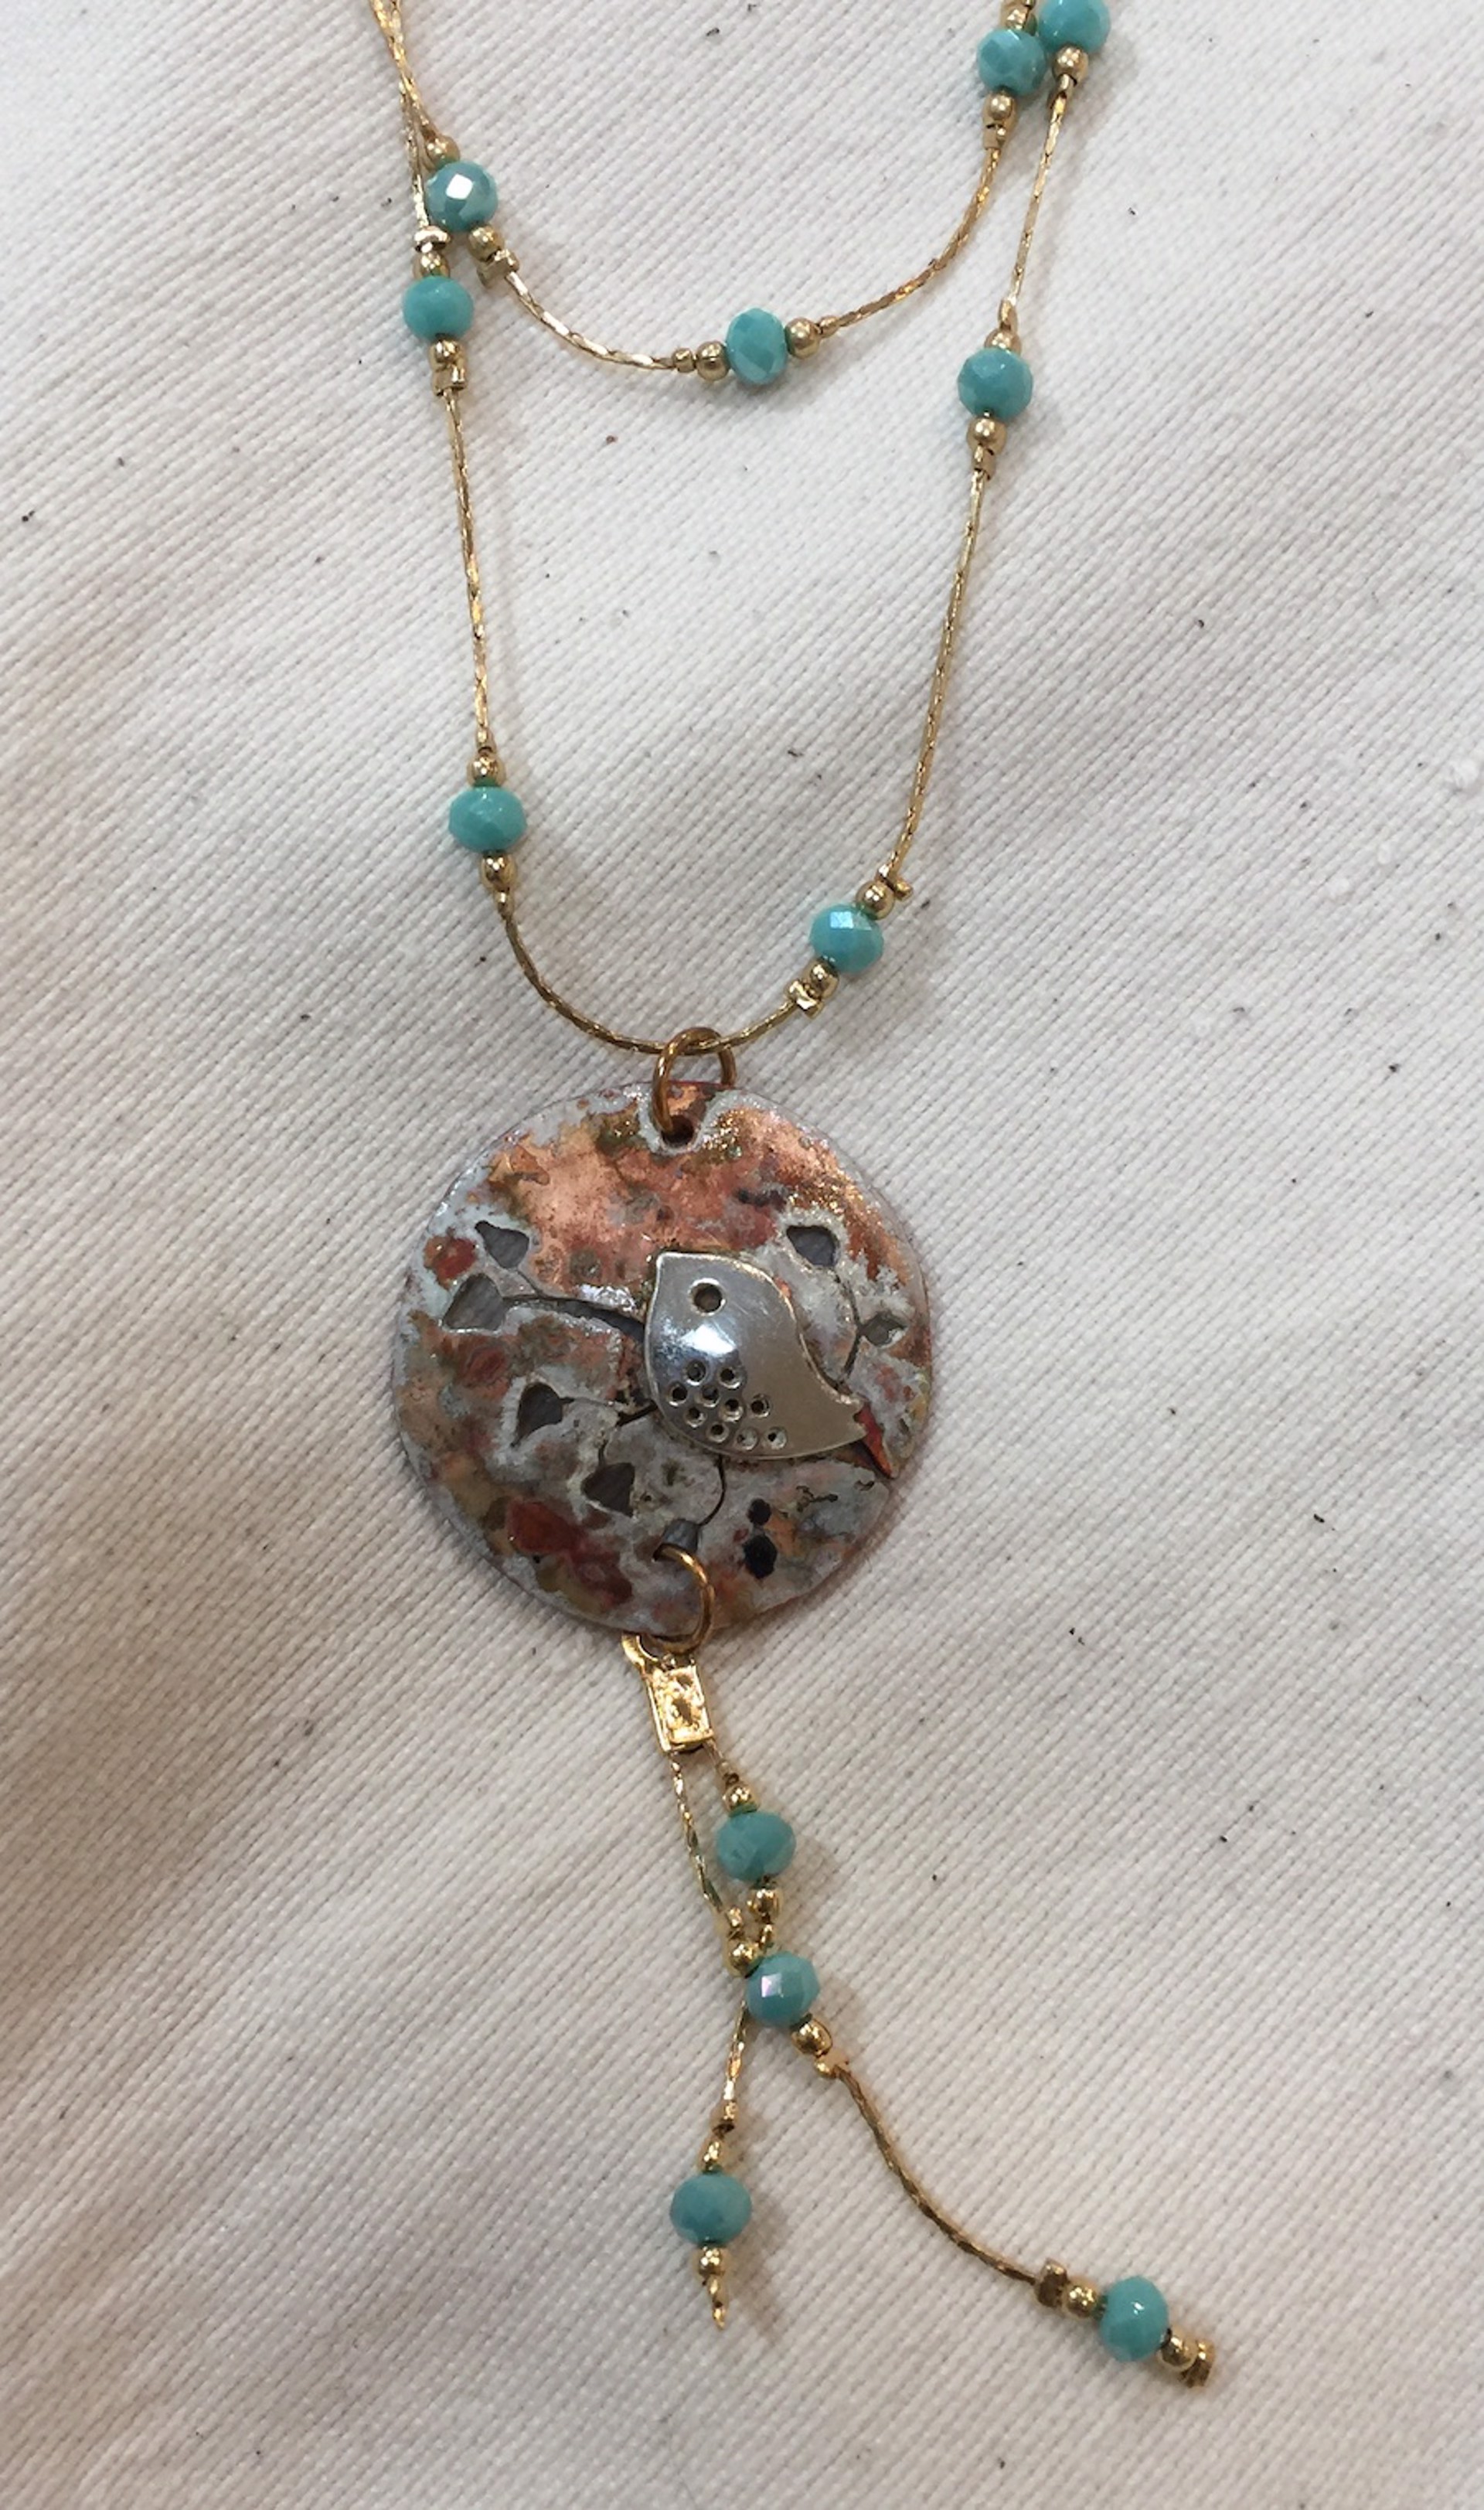 Necklace - Bird With Copper & Silver - 2 Strand 16" Chain - #2015 by Vesta Abel